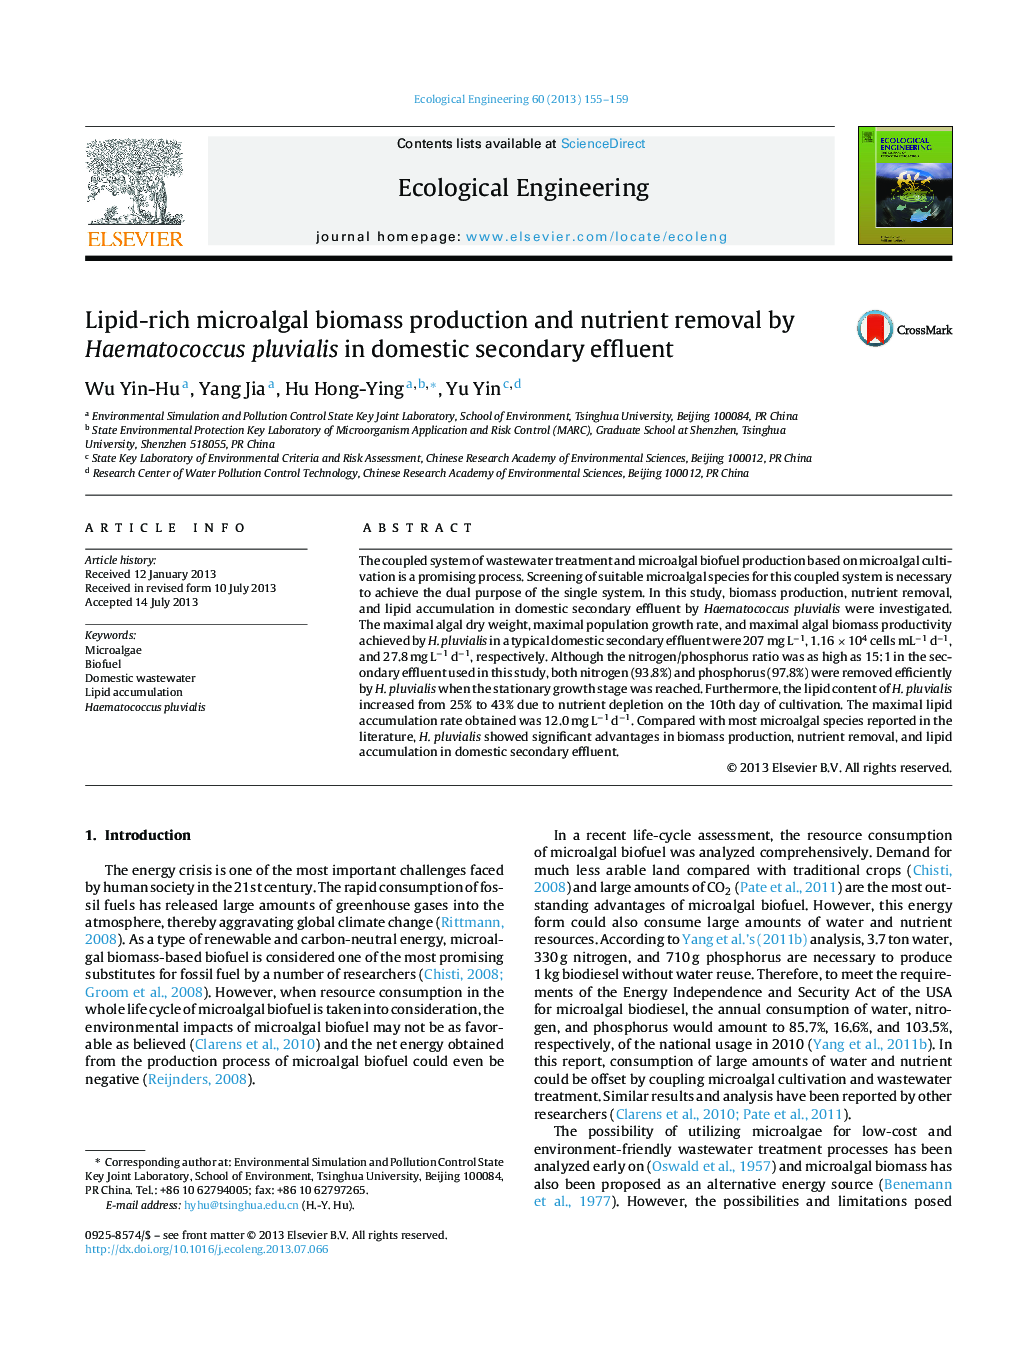 Lipid-rich microalgal biomass production and nutrient removal by Haematococcus pluvialis in domestic secondary effluent